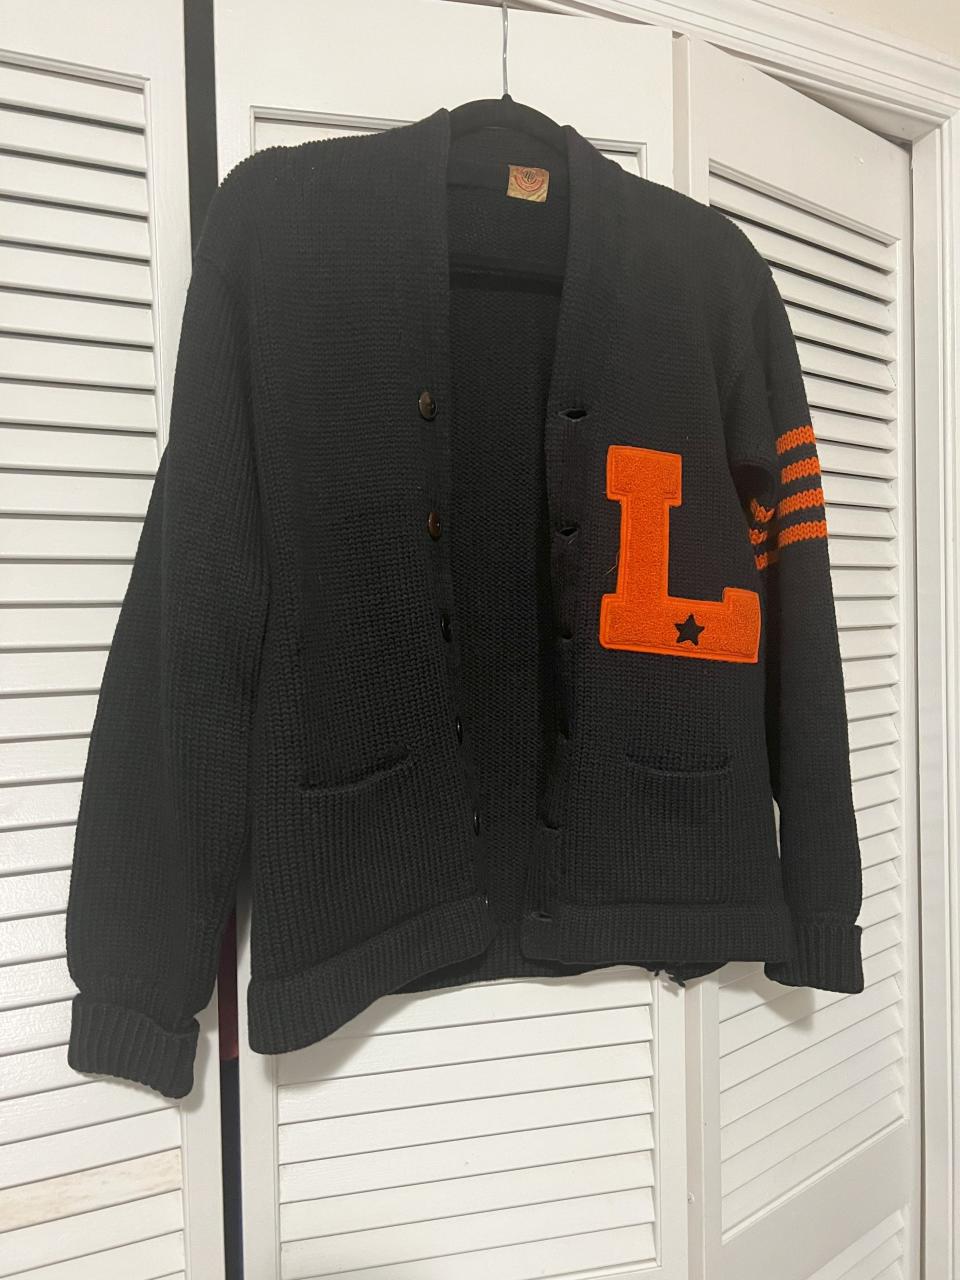 The 1942 letterman sweater worn by David Sudderth from when he was a running back for Leesburg High's football team.